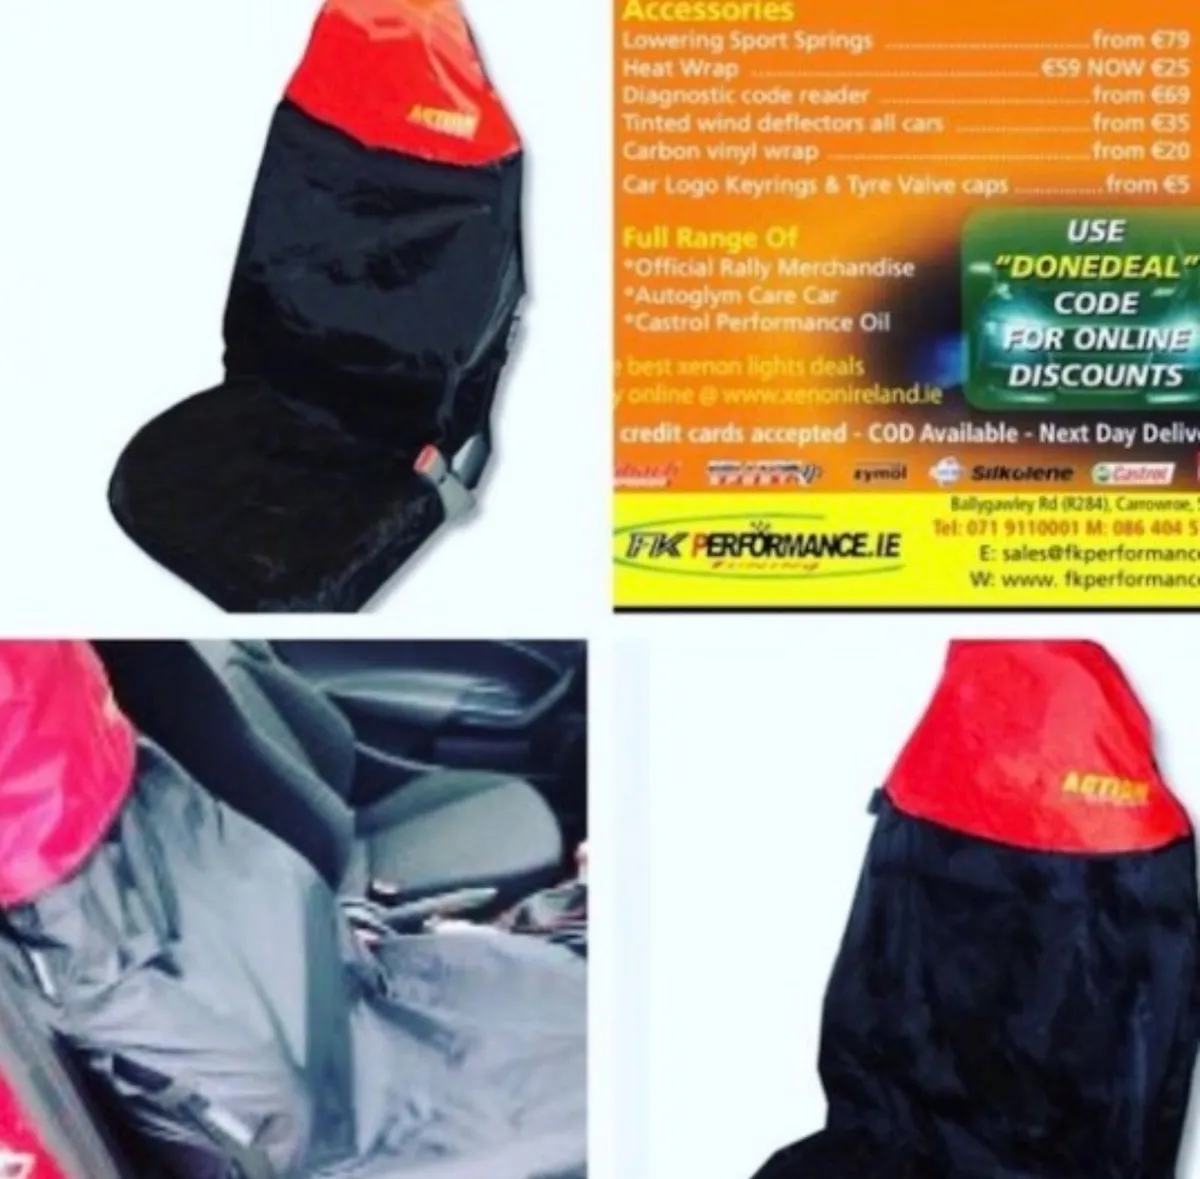 Action sport seat covers specials - Image 1